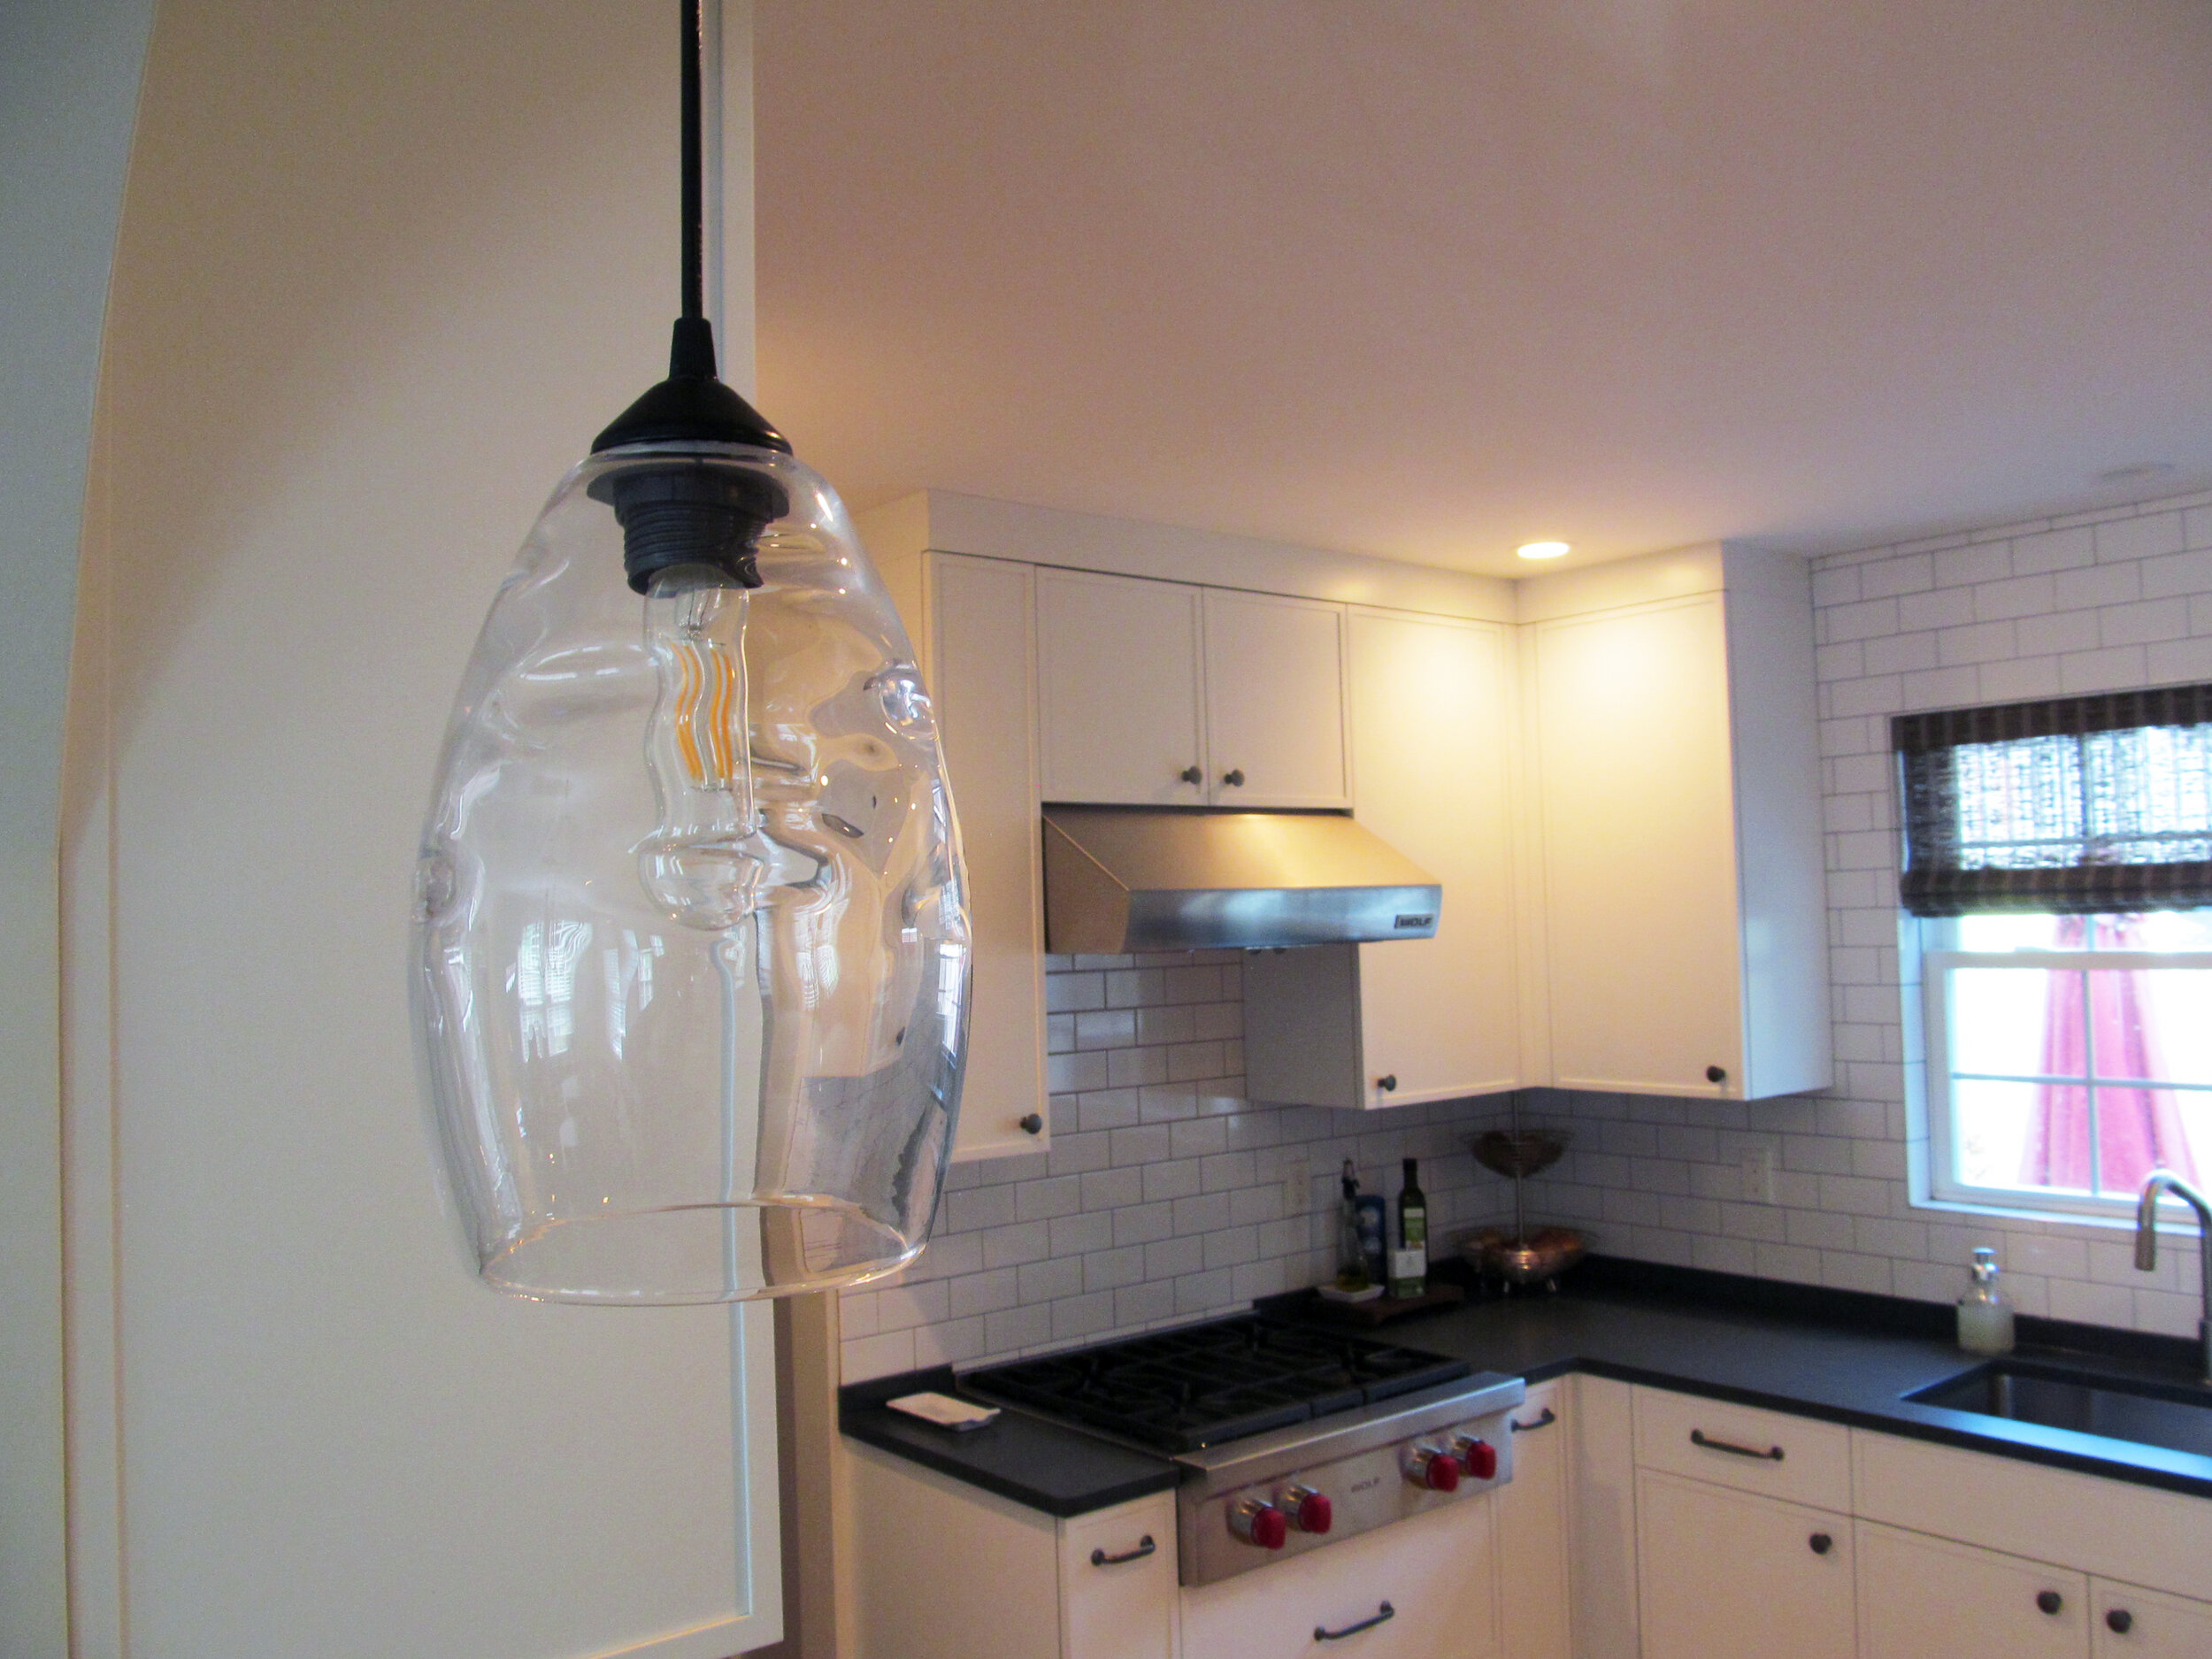 Two blown glass pendants over the peninsula are the center of attention.